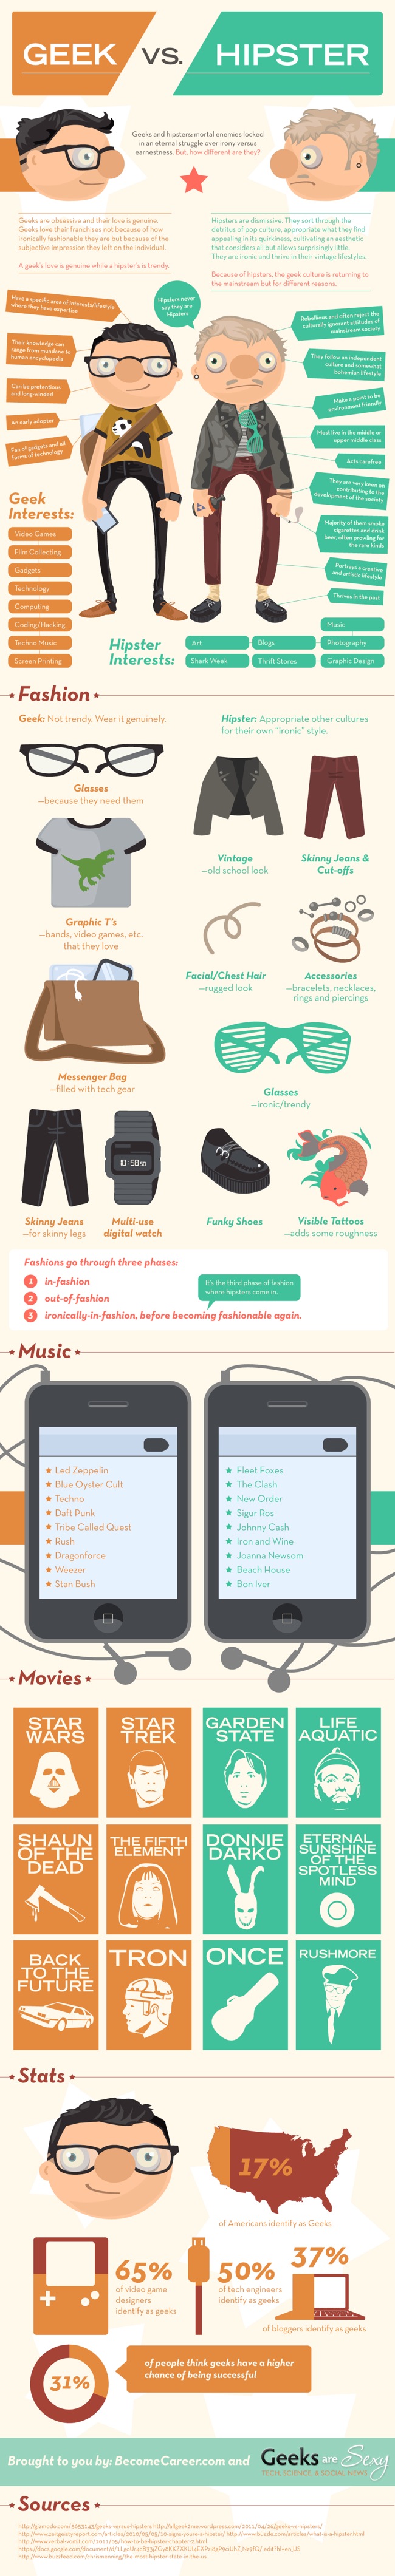 Geek Vs. Hipster infographic